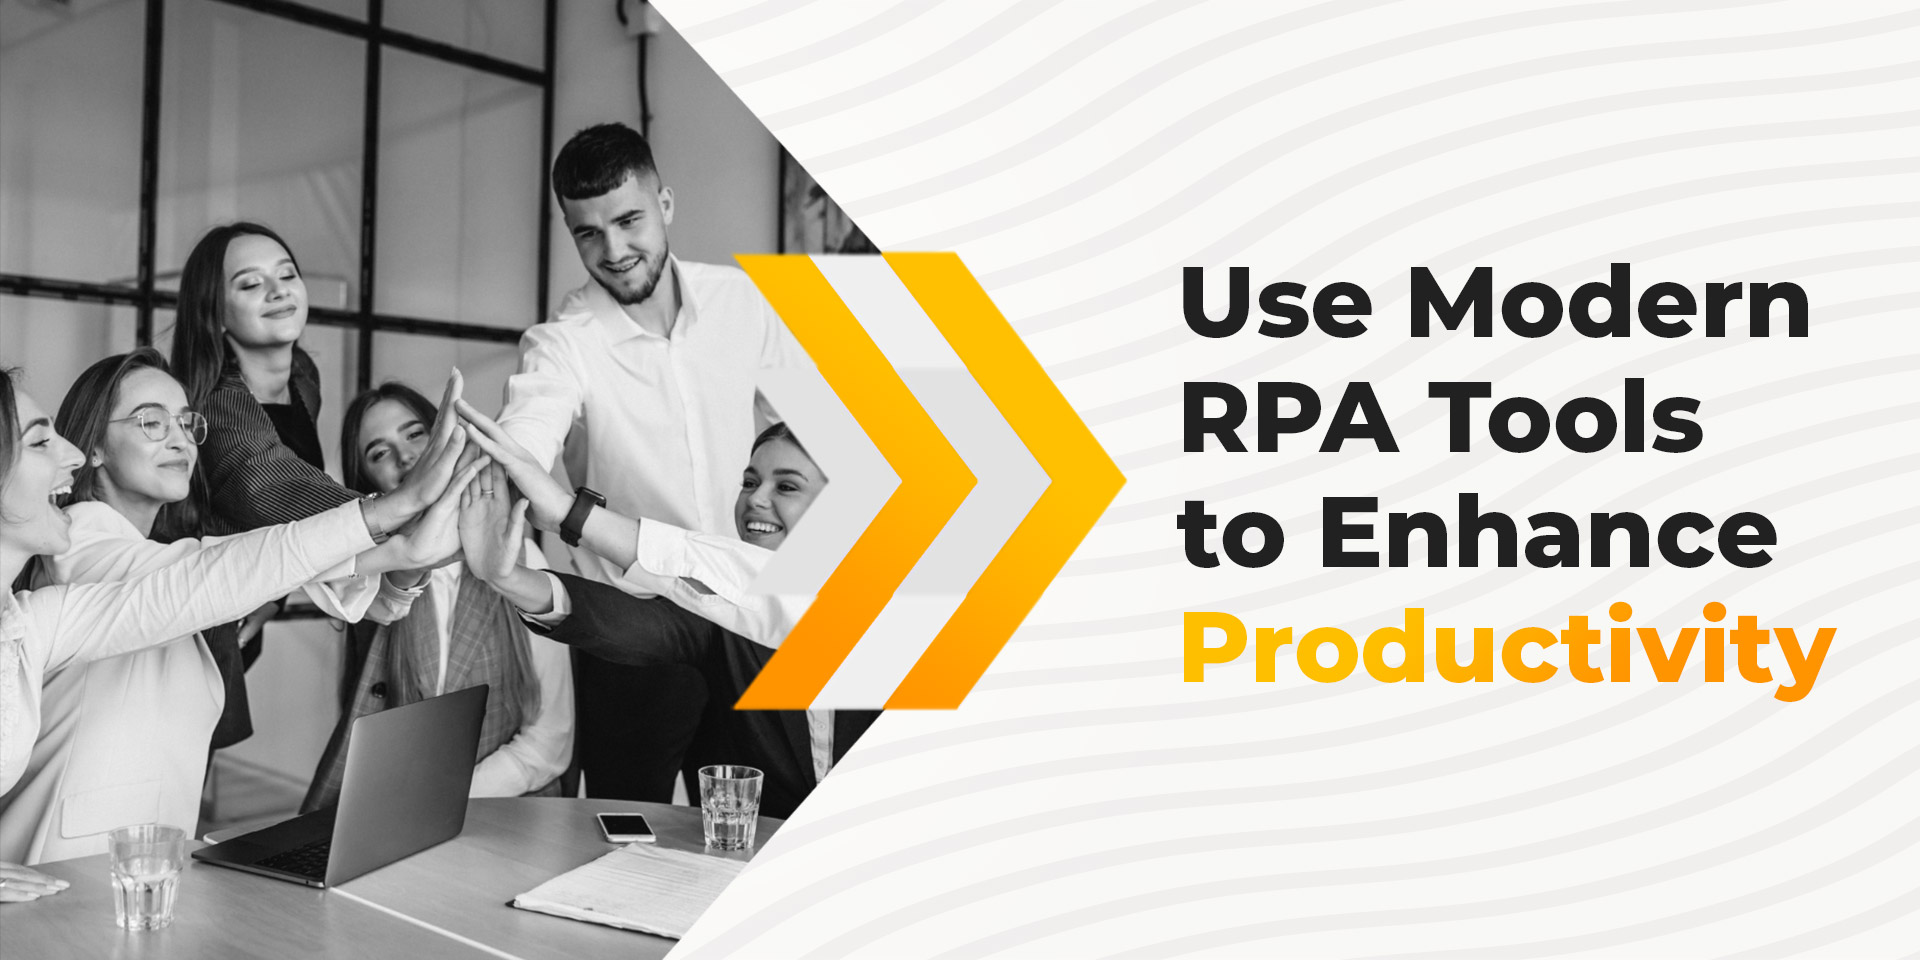 How to Use Modern RPA Tools to Enhance Productivity?